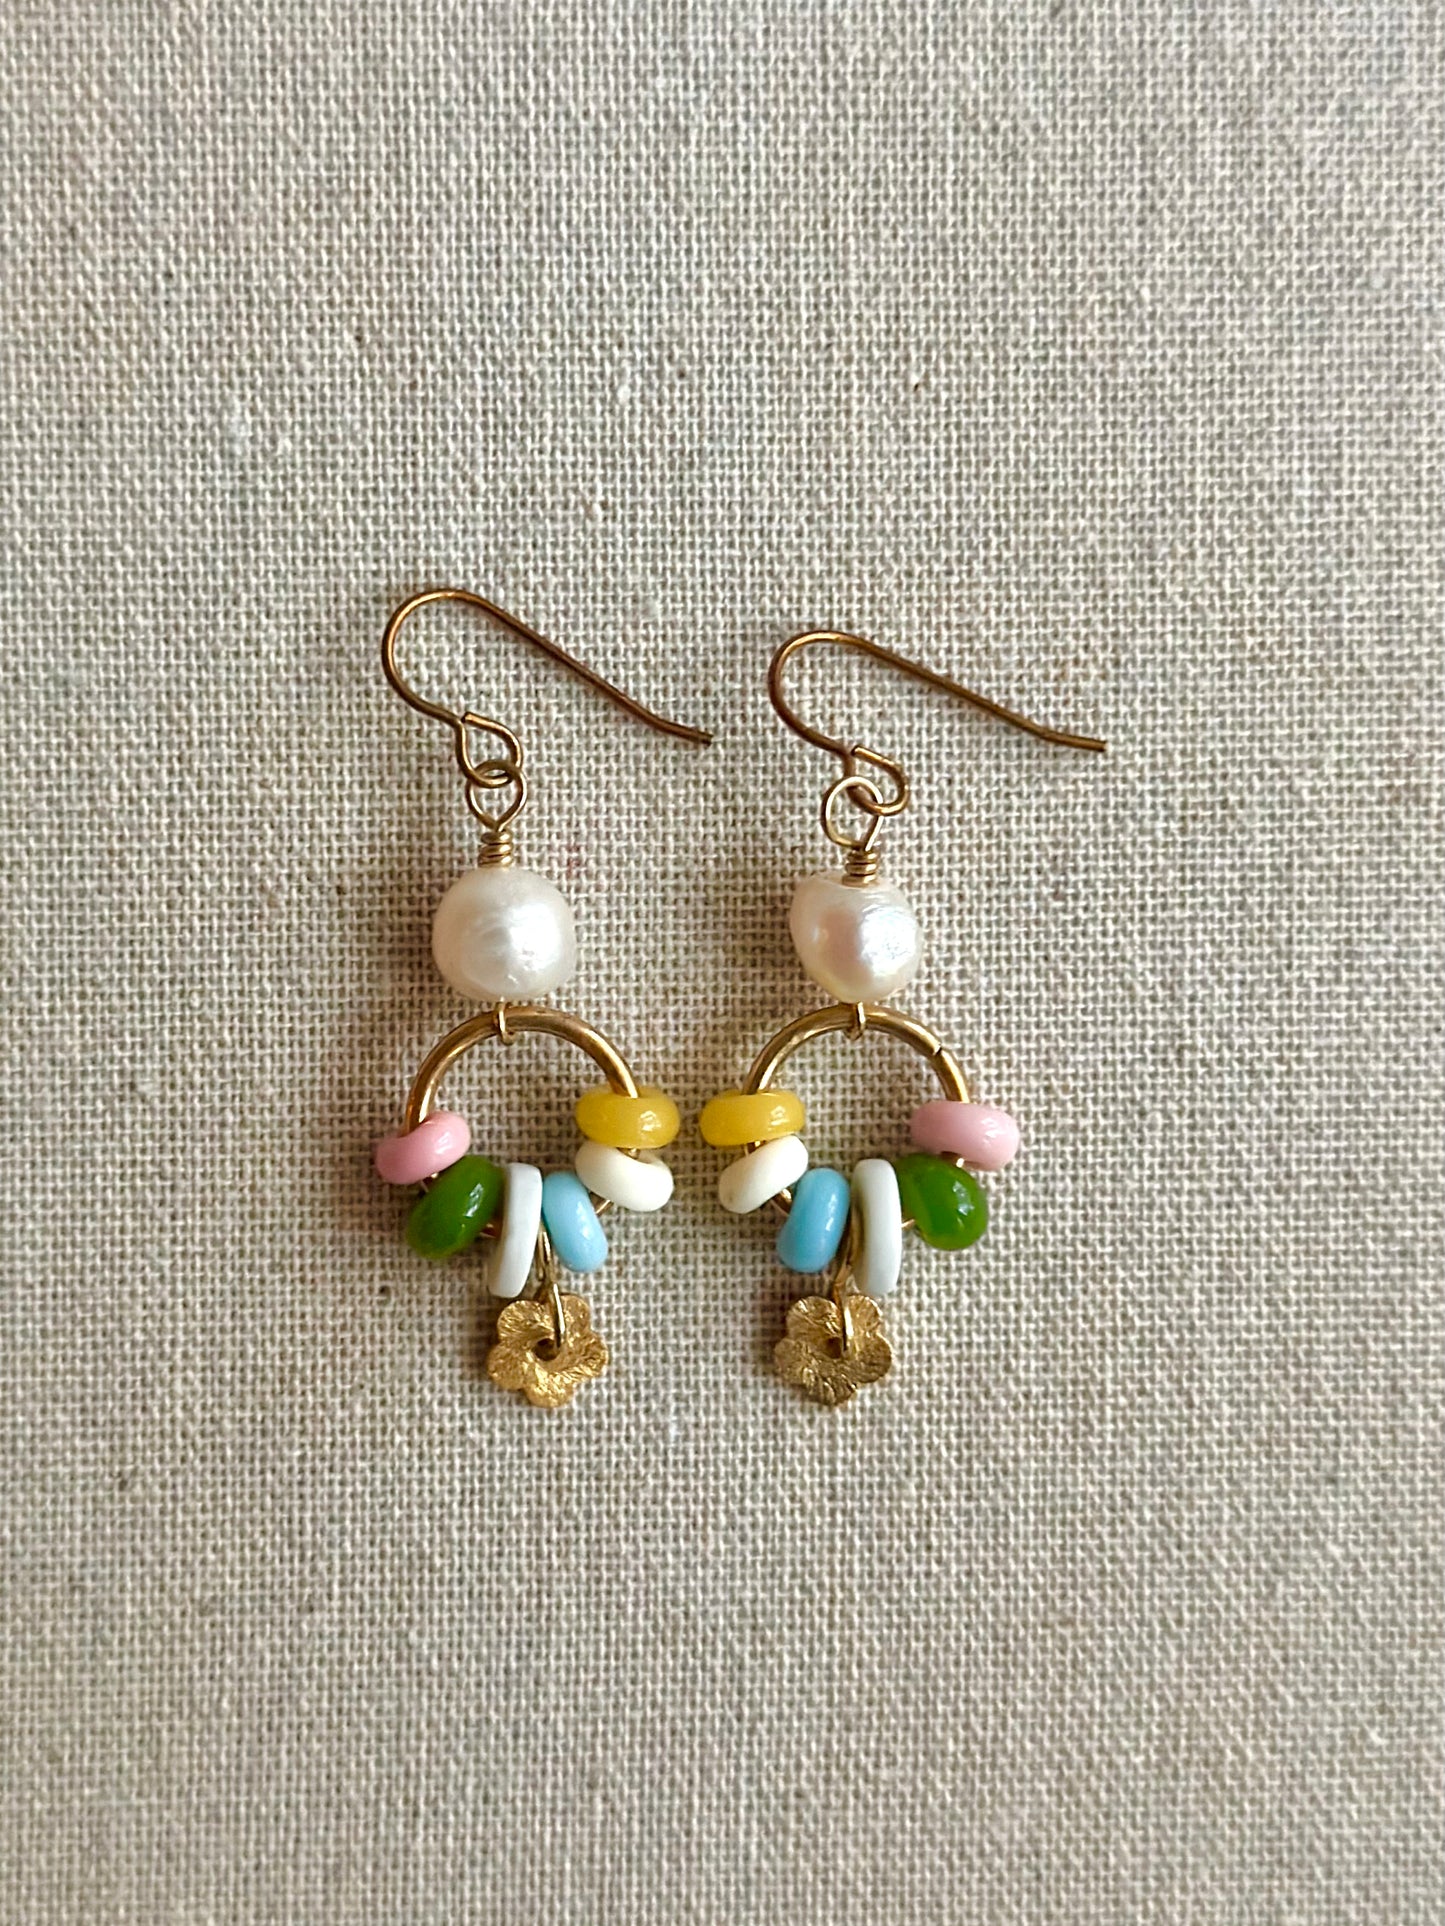 Daisy pastel and pearl earrings